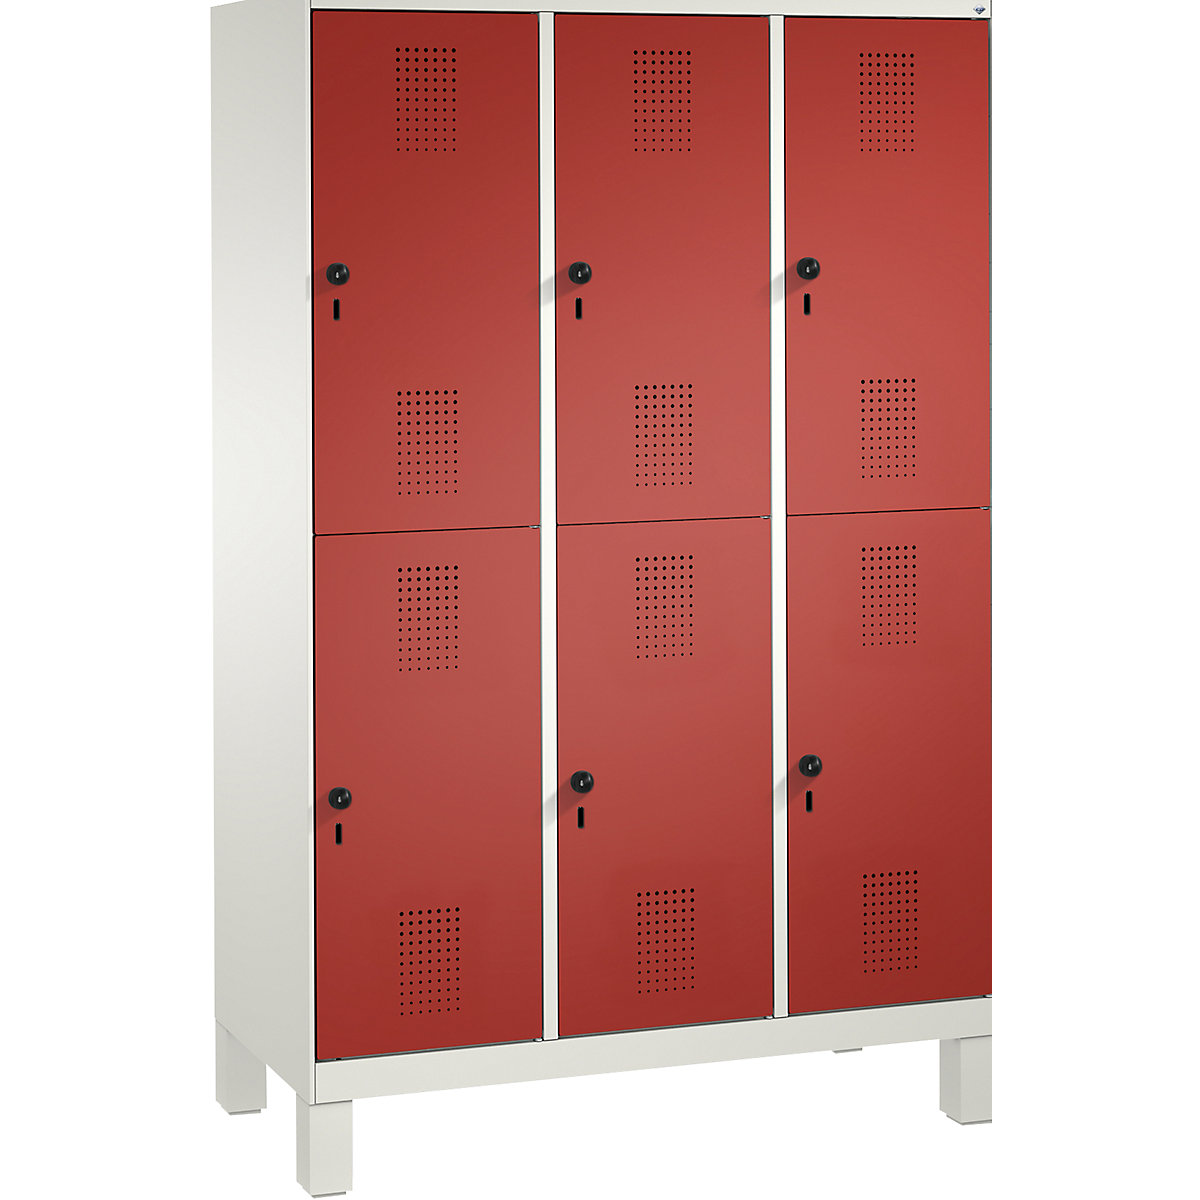 EVOLO cloakroom locker, double tier, with feet – C+P, 3 compartments, 2 shelf compartments each, compartment width 400 mm, traffic white / flame red-4